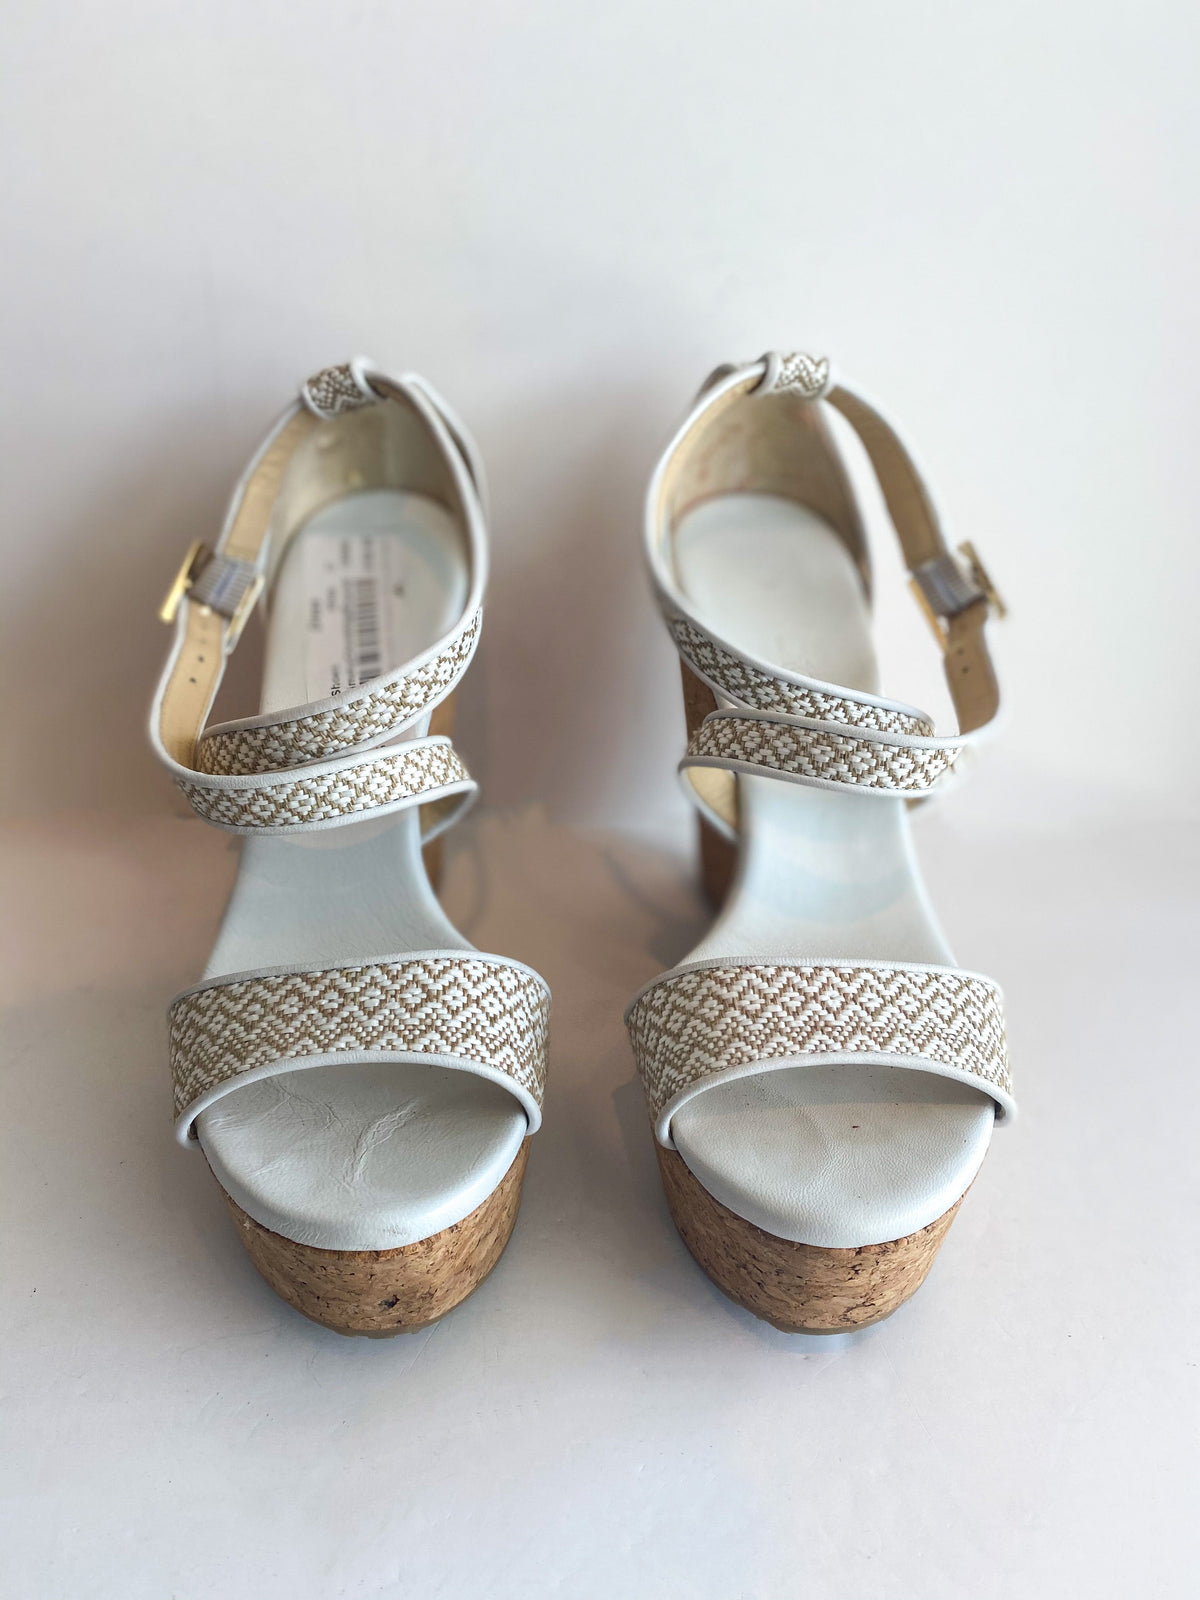 Jimmy Choo Printed Wedges Embroidered Tan White Cork Front of Shoes